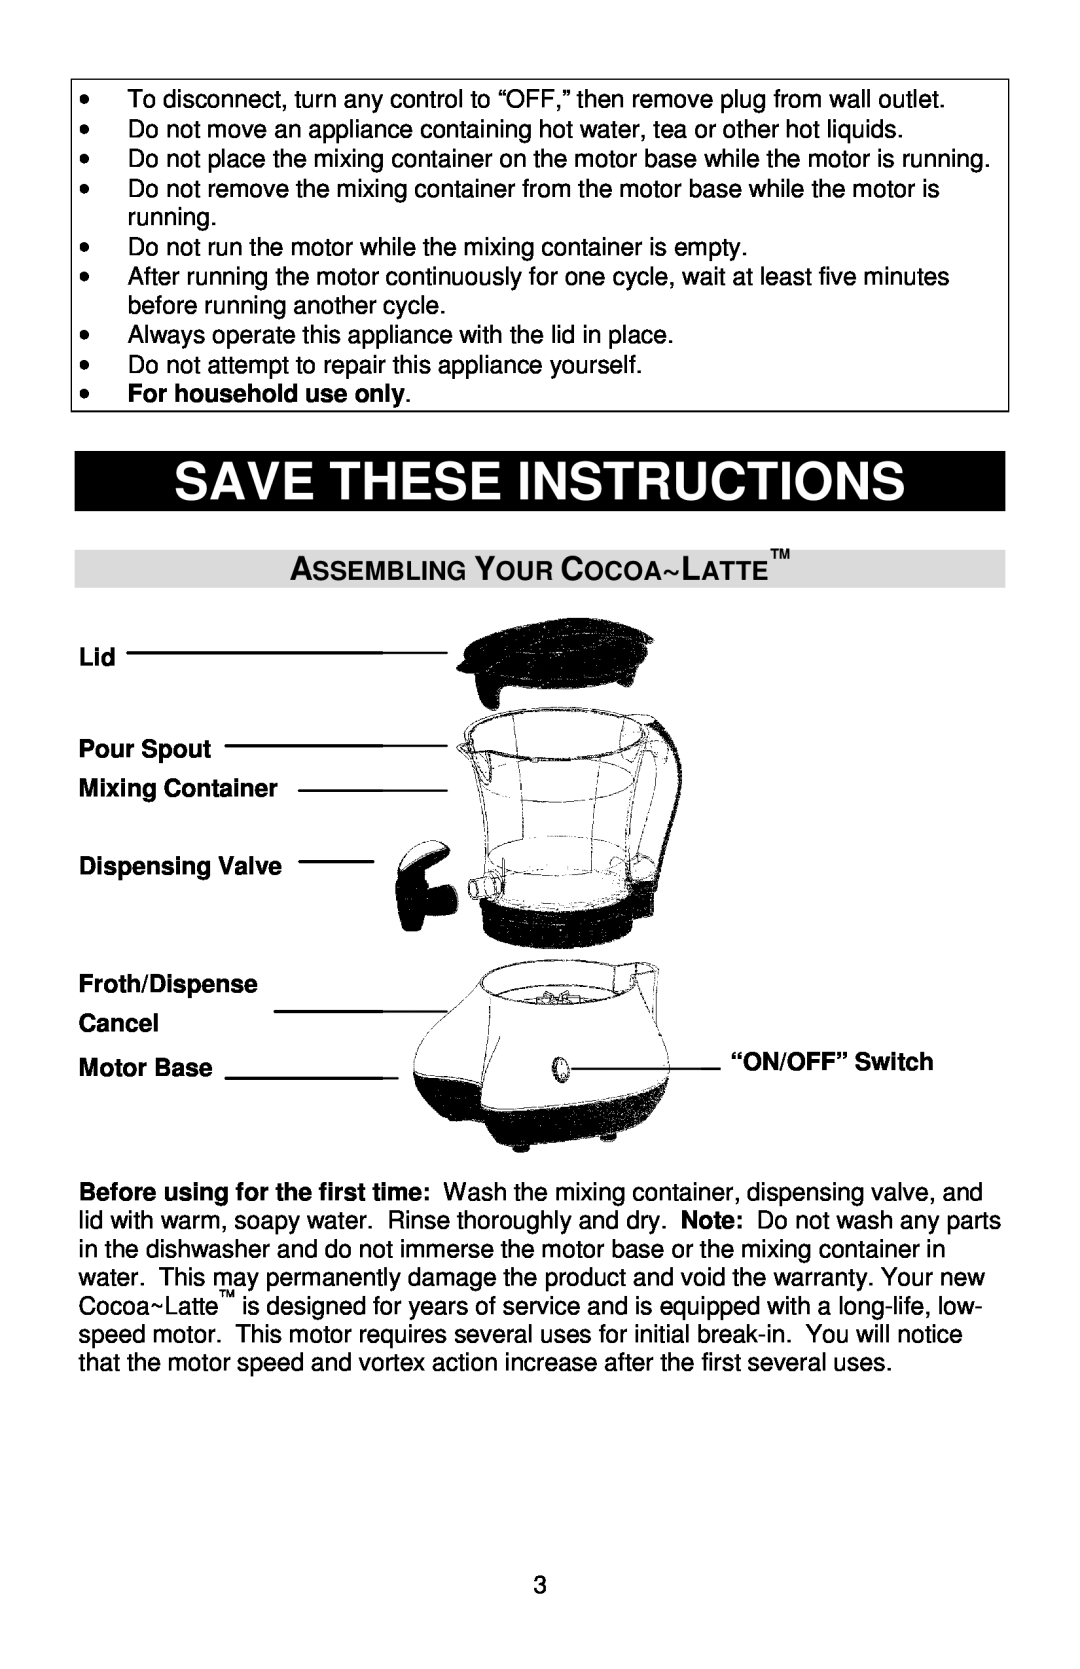 West Bend Back to Basics Save These Instructions, Assembling Your Cocoa~Latte, •For household use only, Pour Spout 